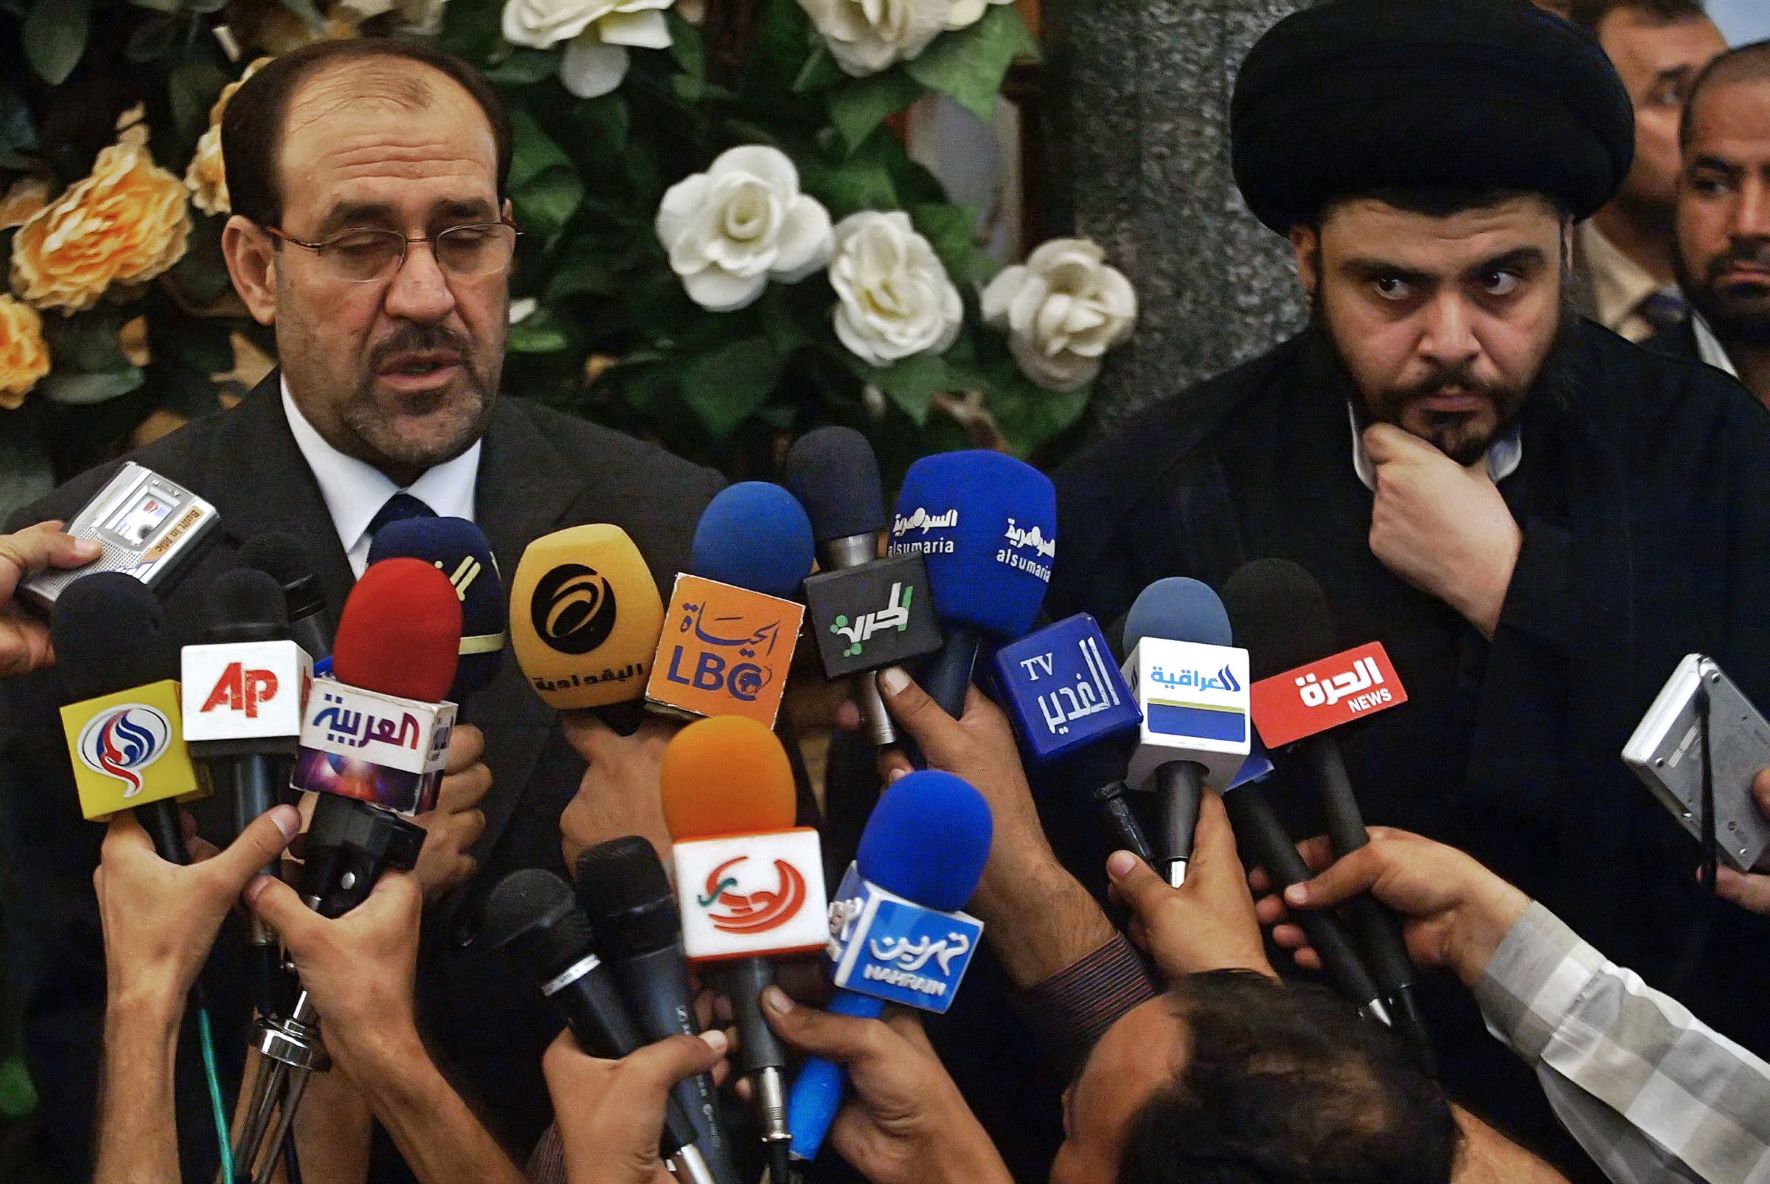 Then-Iraqi Prime Minister Nouri al-Maliki (L) speaks during a joint press conference with Shia cleric Muqtada al-Sadr upon their meeting in Najaf, central Iraq, 18 October 2006 (AFP)